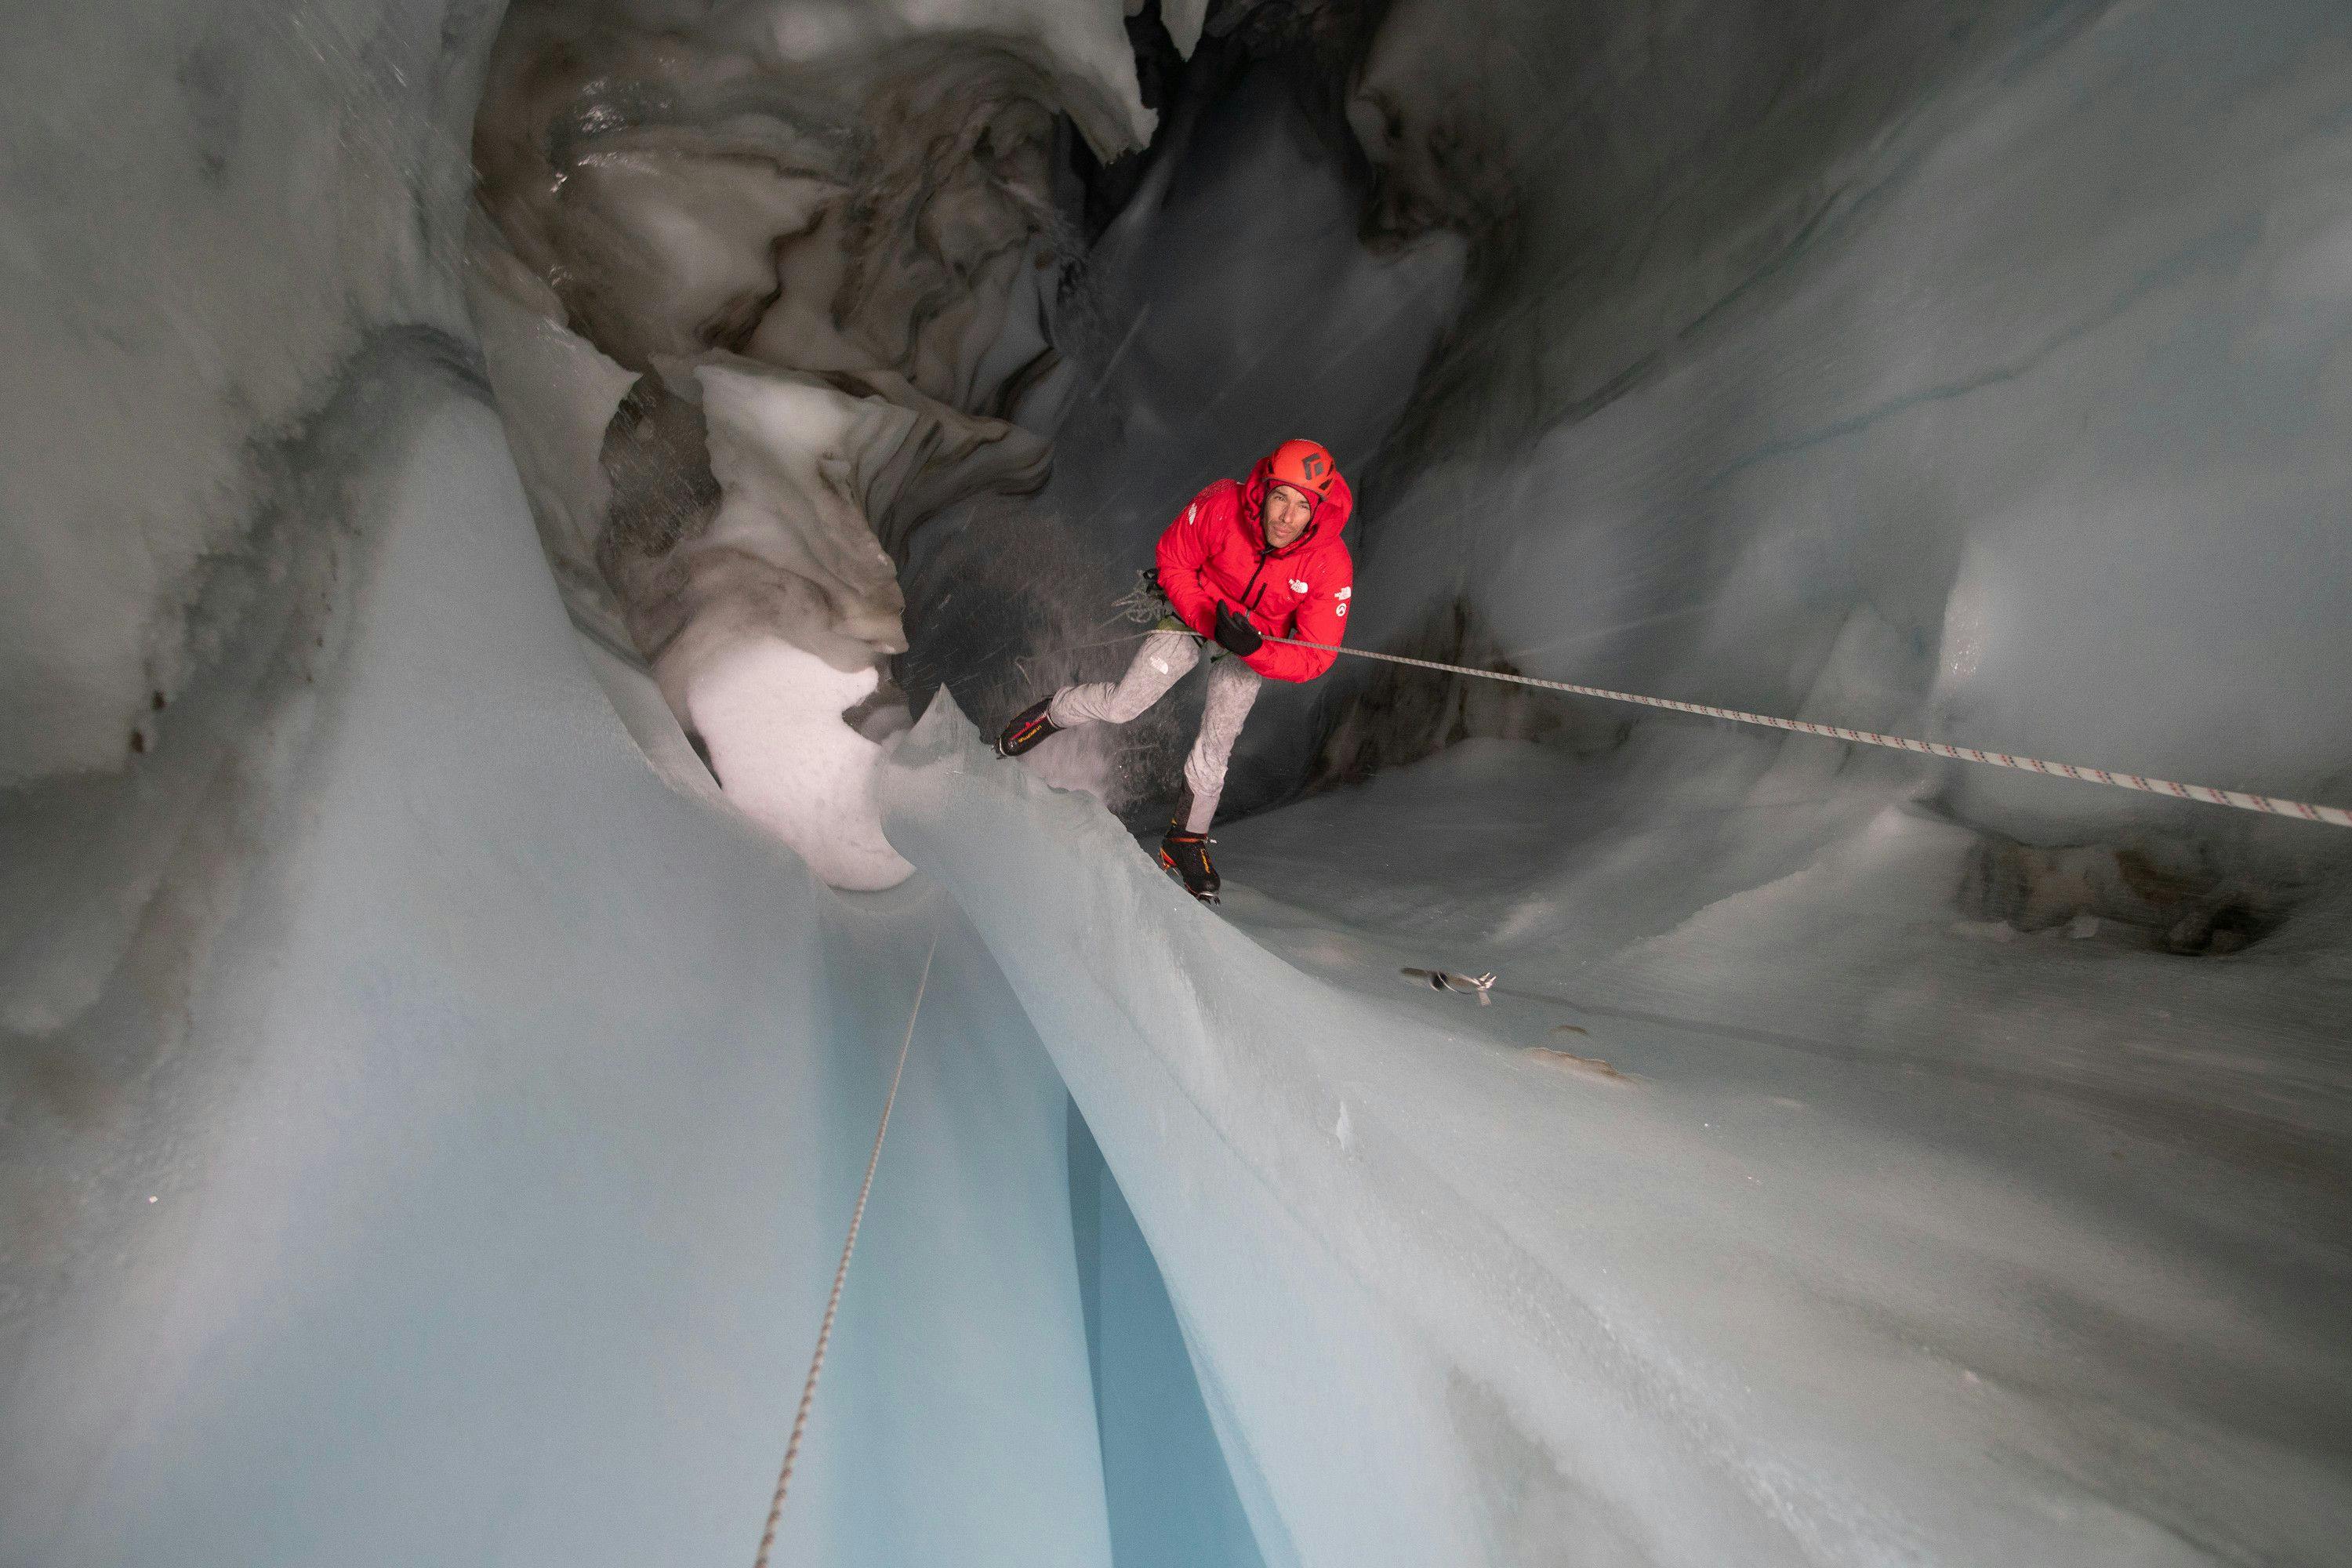 Arctic Ascent with Alex Honnold, National Geographic, TV PR camping, MCPR, Mark Collins PR